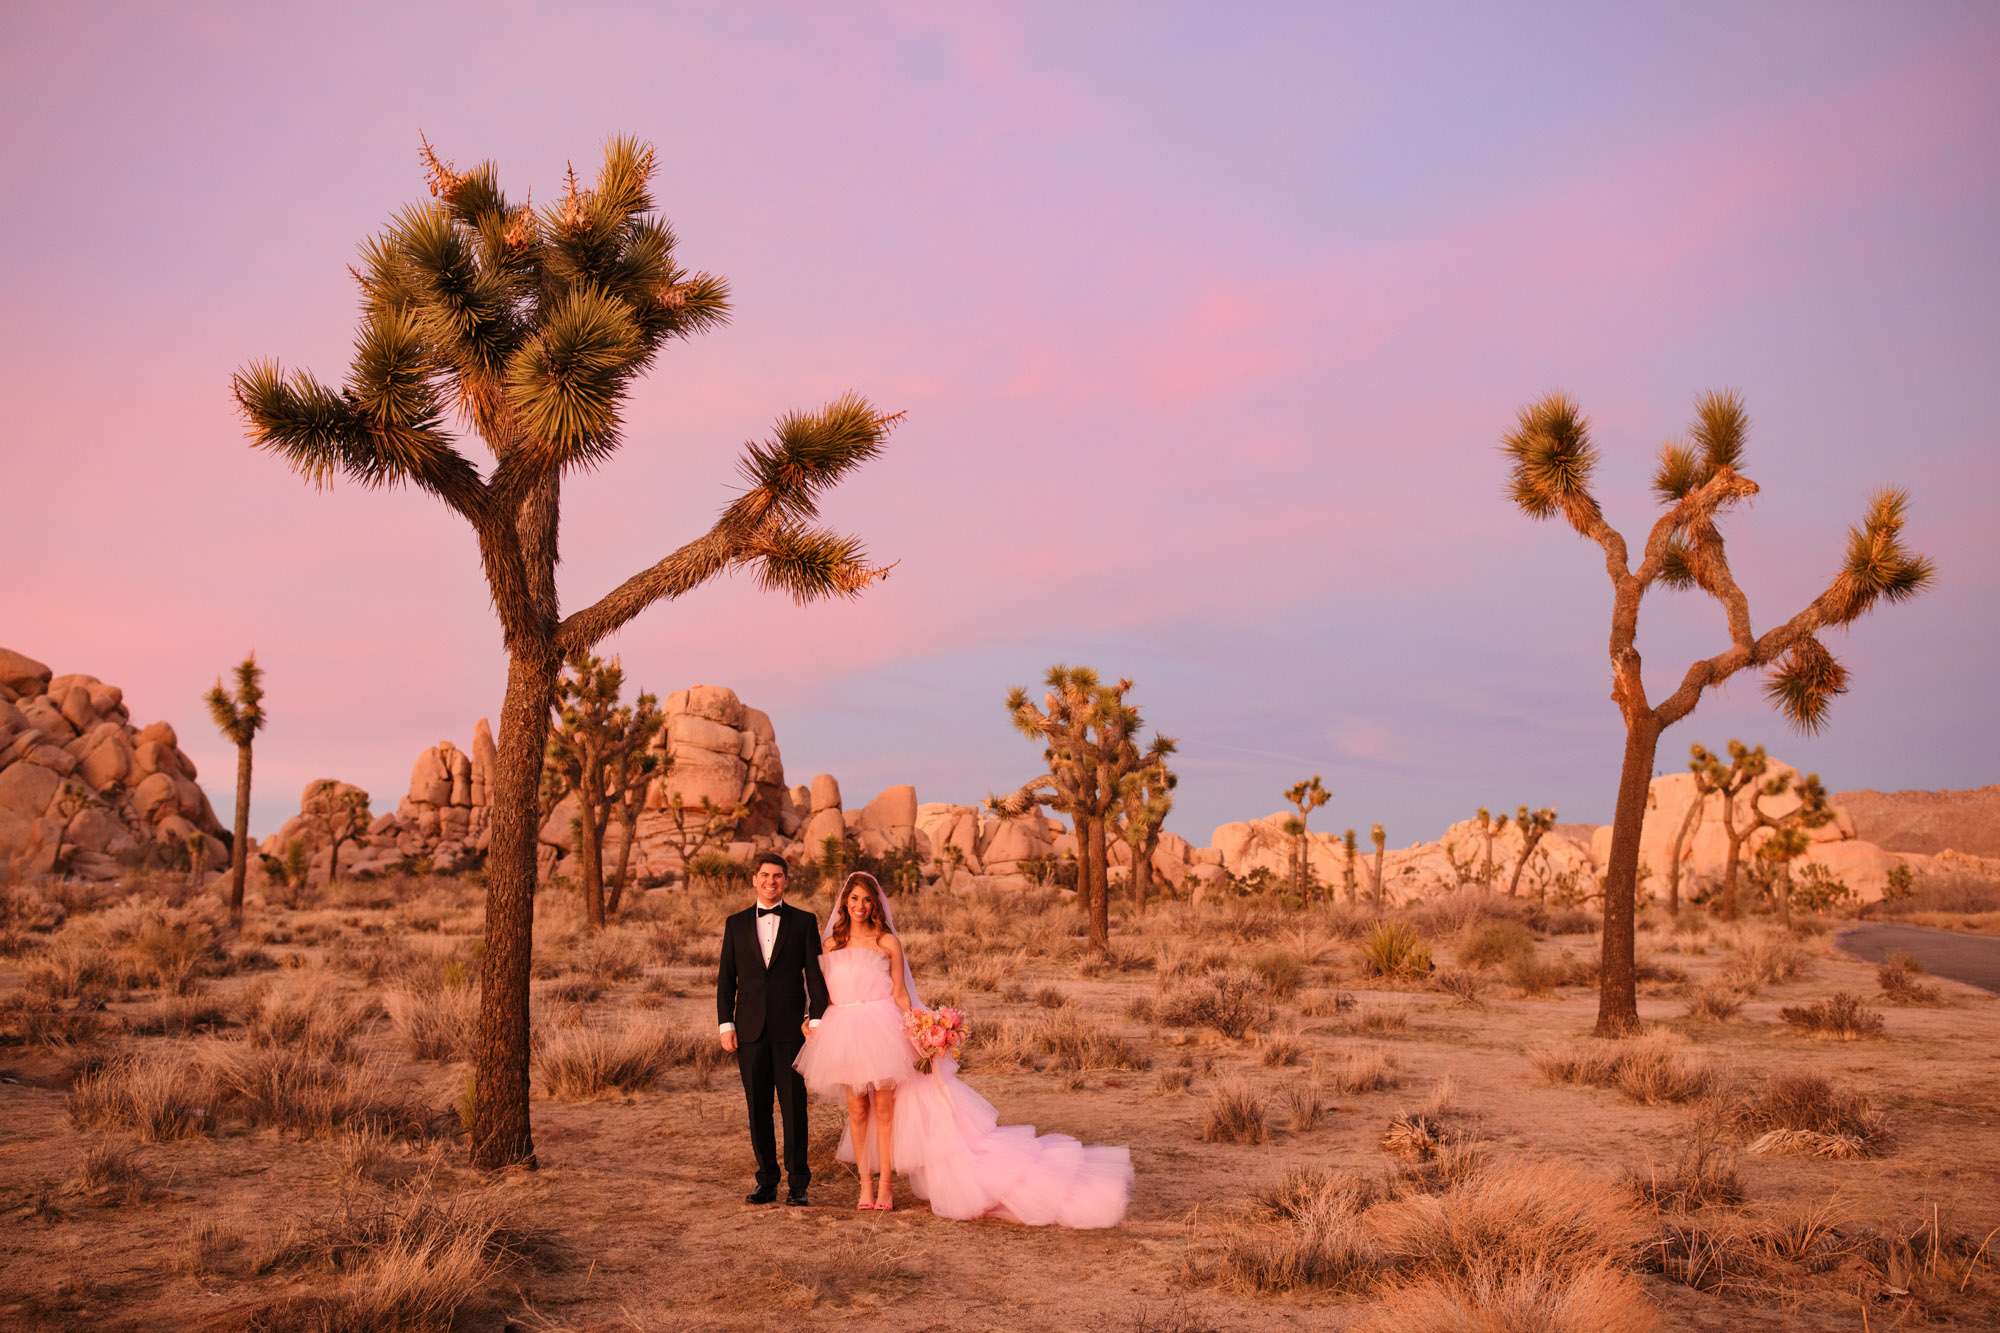 Bride and groom among Joshua Tree desert at sunset | Pink wedding dress Joshua Tree elopement featured on Green Wedding Shoes | Colorful desert wedding inspiration for fun-loving couples in Southern California #joshuatreewedding #joshuatreeelopement #pinkwedding #greenweddingshoes Source: Mary Costa Photography | Los Angeles